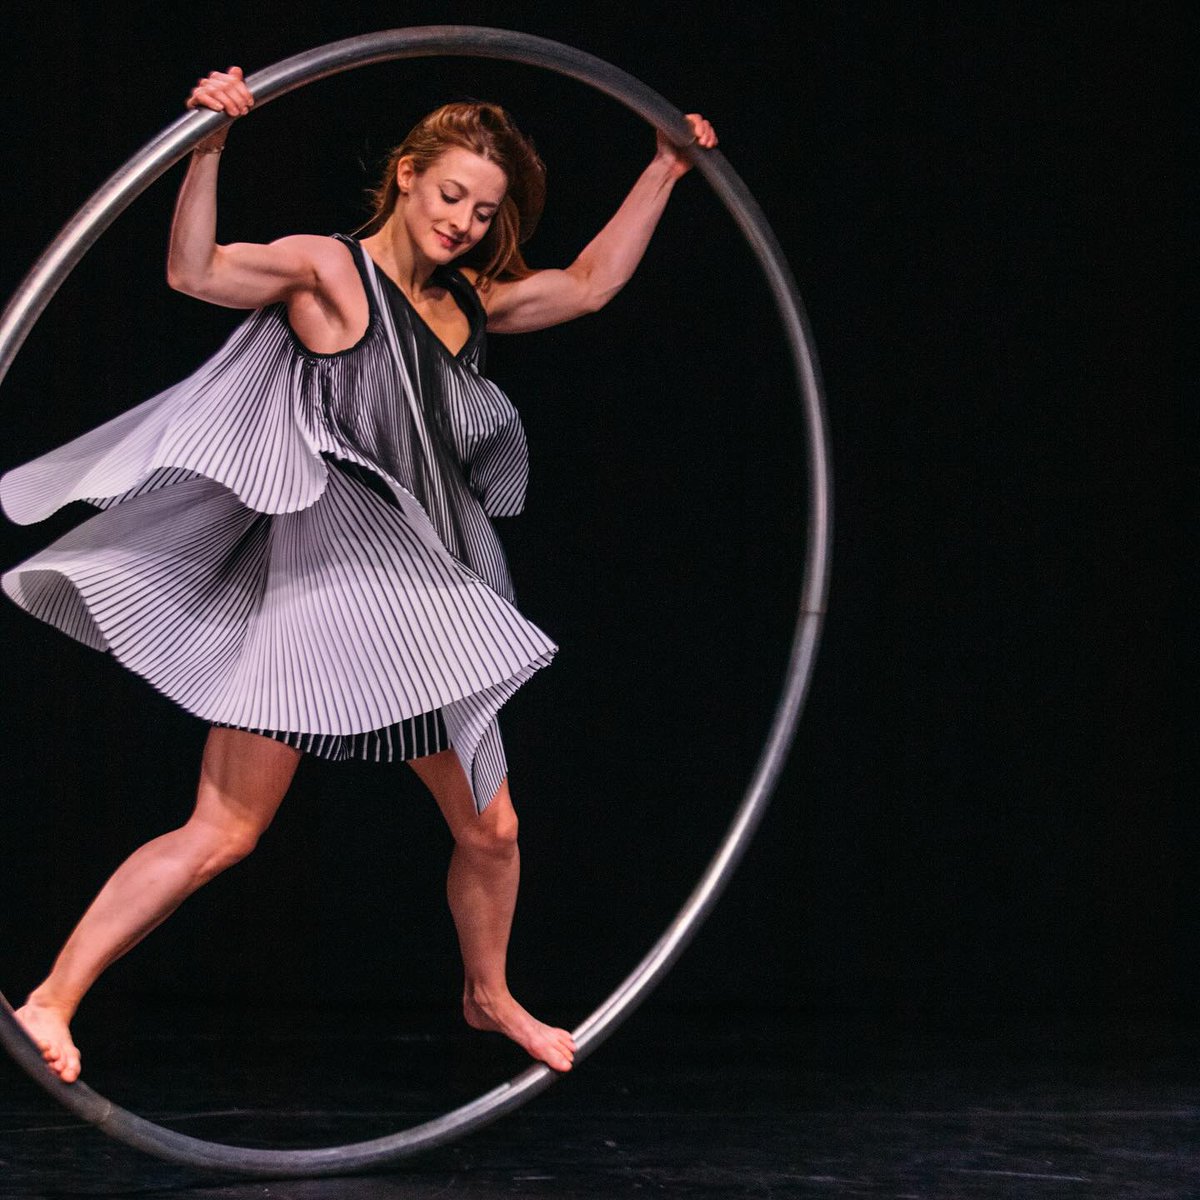 ✨ Professional Workshop: Cyr Wheel with Beverley Grant @bevjmgrant This Cyr Wheel workshop will begin with a short warm up of balance, coordination and spin exercises set in a relaxed dance context. 📅 Tue 16 Jan | 11:00 📍 @DanceBase 🔗 More info: dancebase.co.uk/classes/cyr-wh…